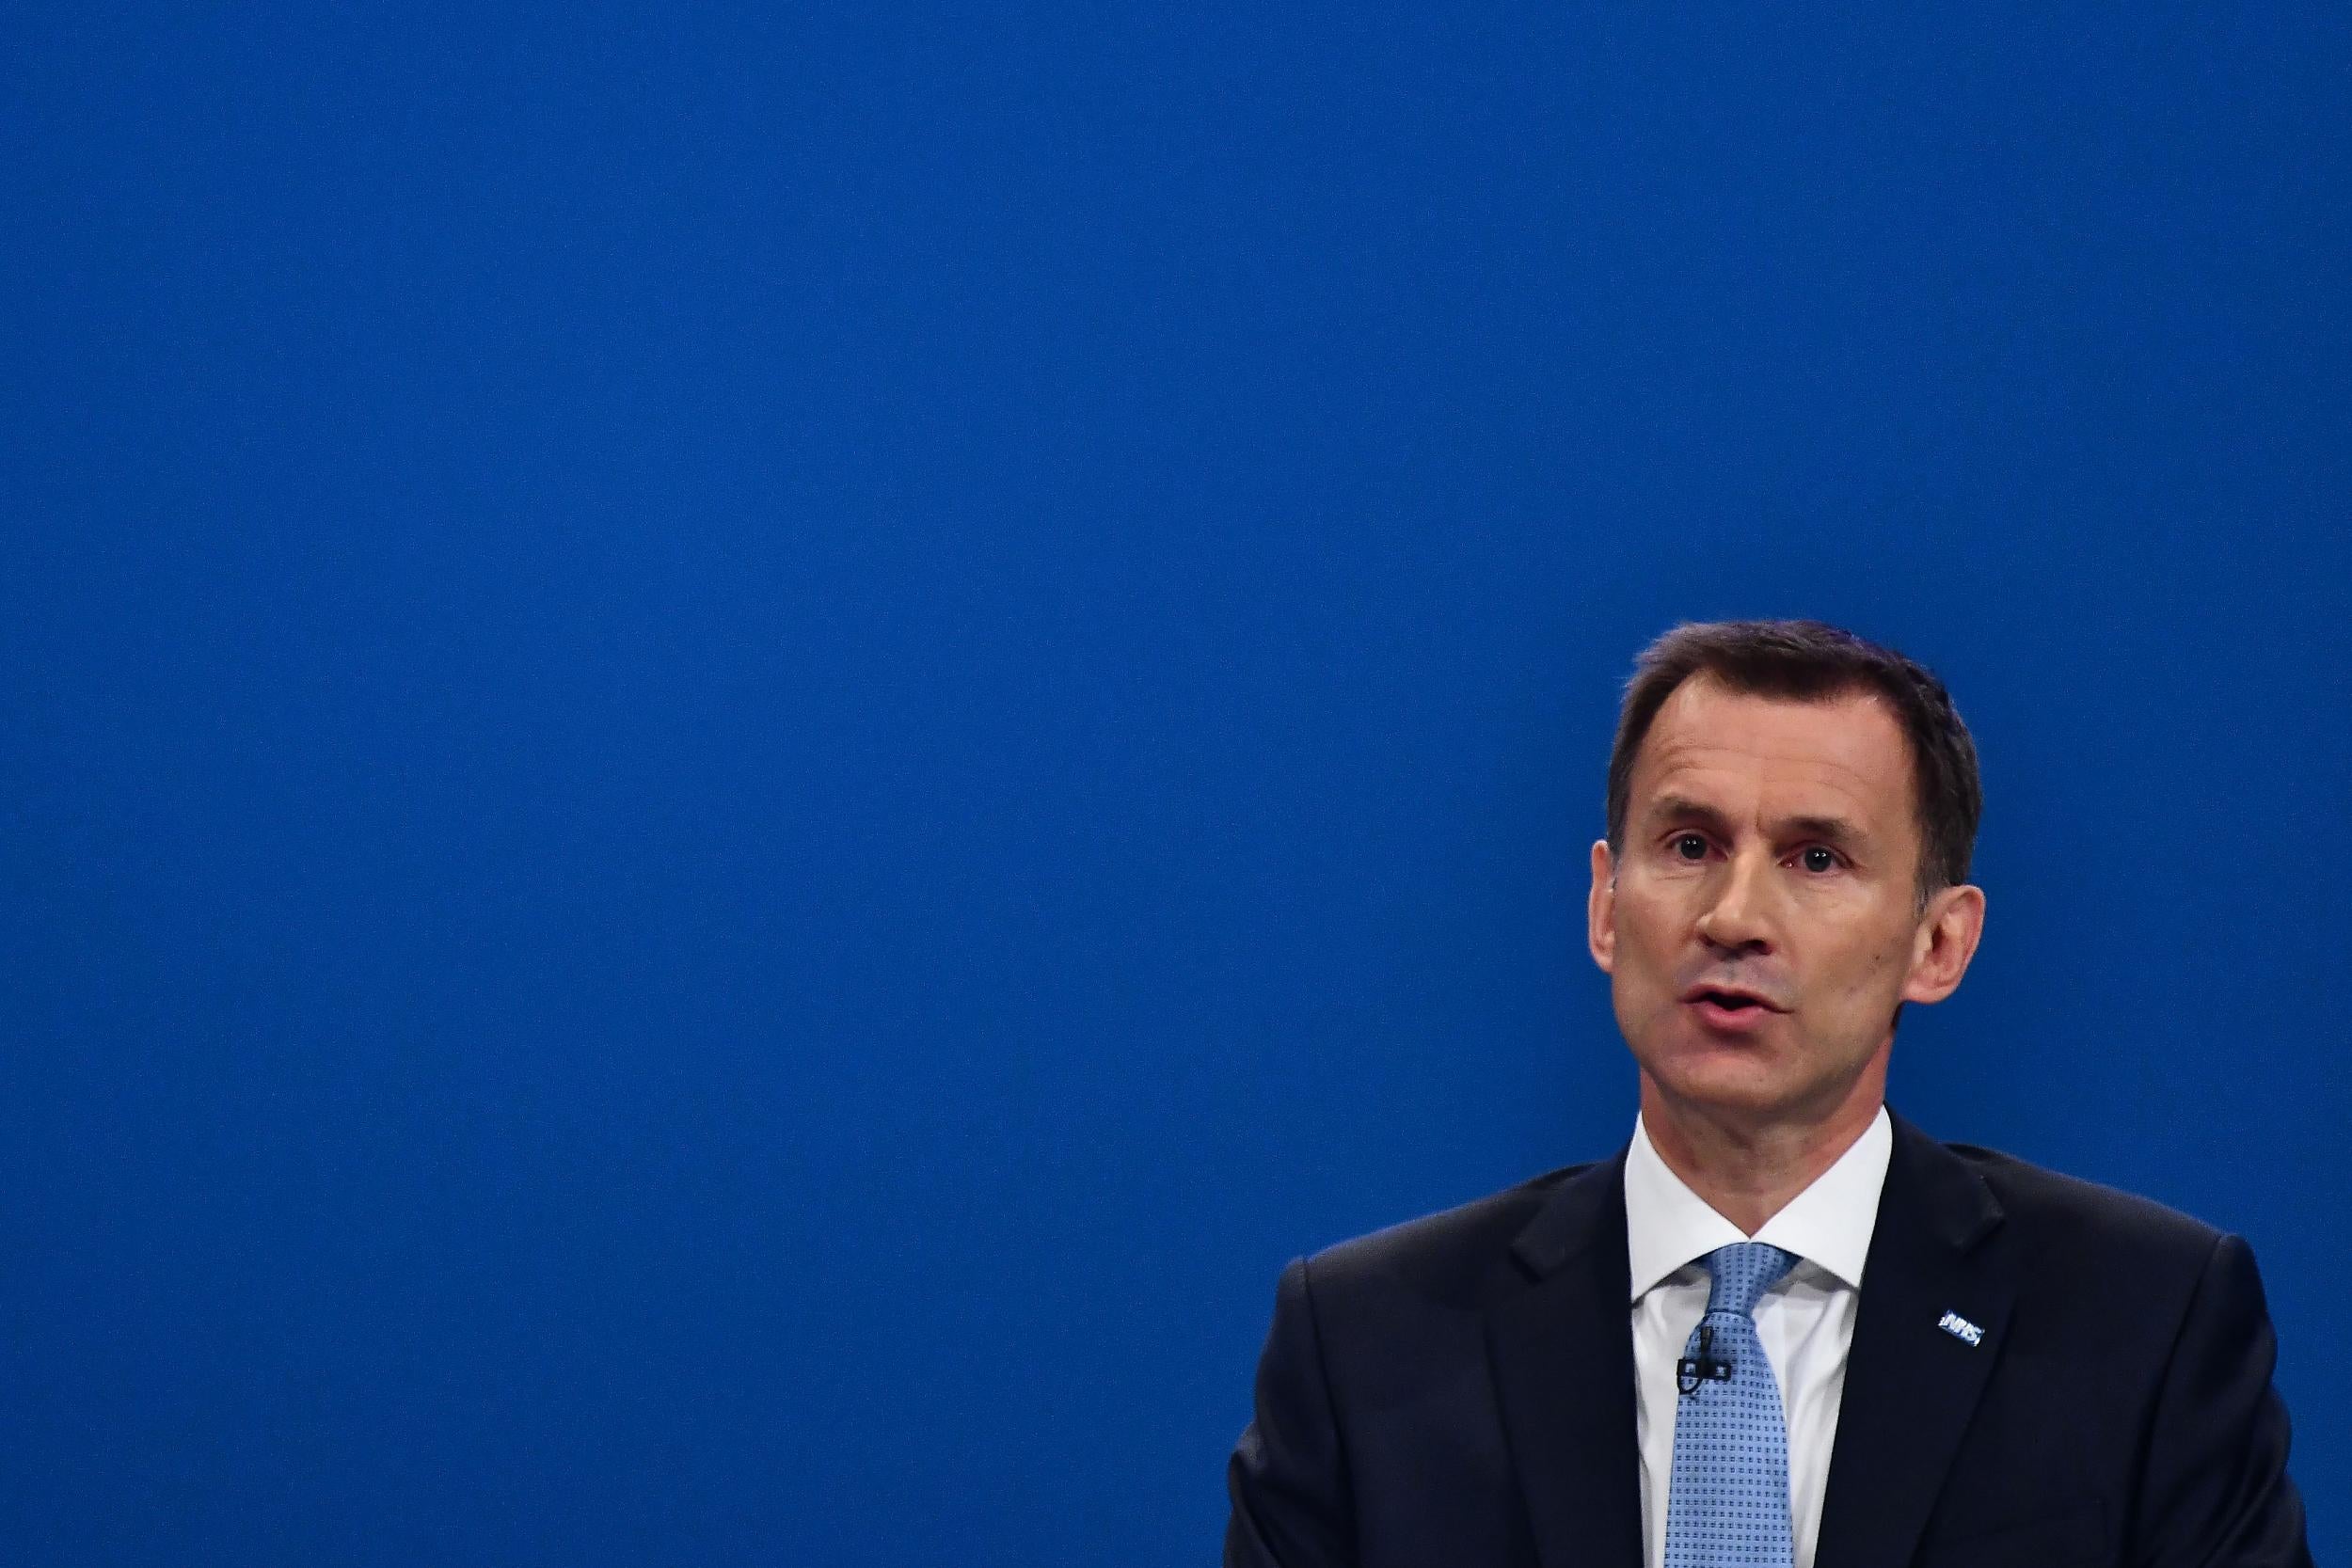 Britain's Health Secretary Jeremy Hunt delivers his speech on the third day of the Conservative Party annual conference at the Manchester Central Convention Centre in Manchester